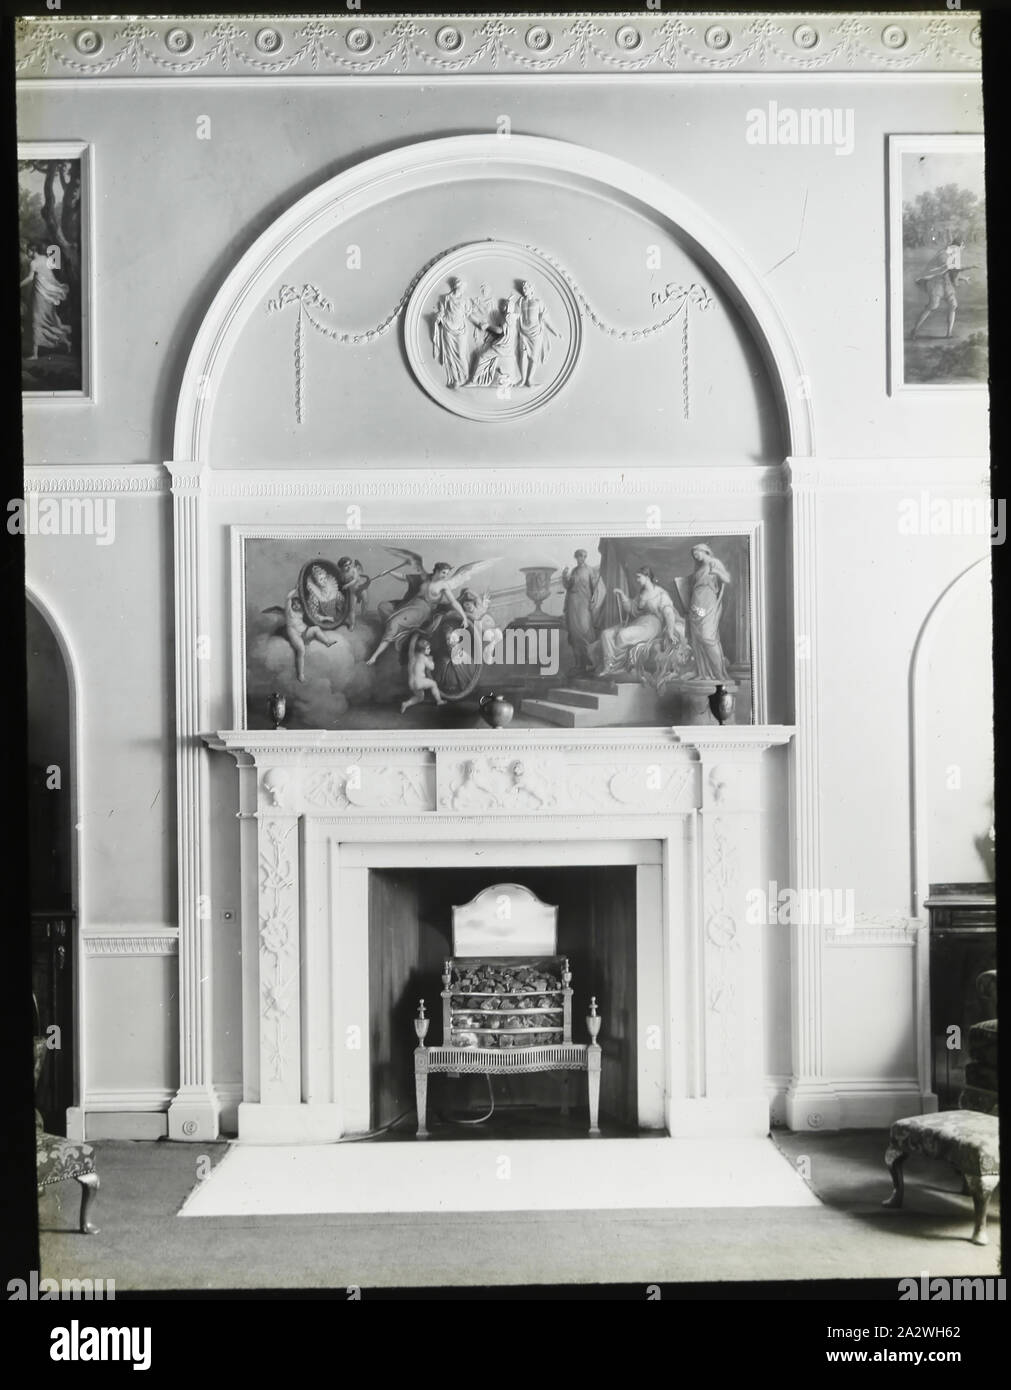 Lantern Slide - 'Adam Library Fireplace, 1909-1930, One of a set of ninety magic lantern slides containing images of artefacts, art works, decorative arts, interiors and furniture which appear to belong to various museum and gallery collections in the United Kingdom. The Francis Collection of pre-cinematic apparatus and ephemera was acquired by the Australian and Victorian Governments in 1975 Stock Photo